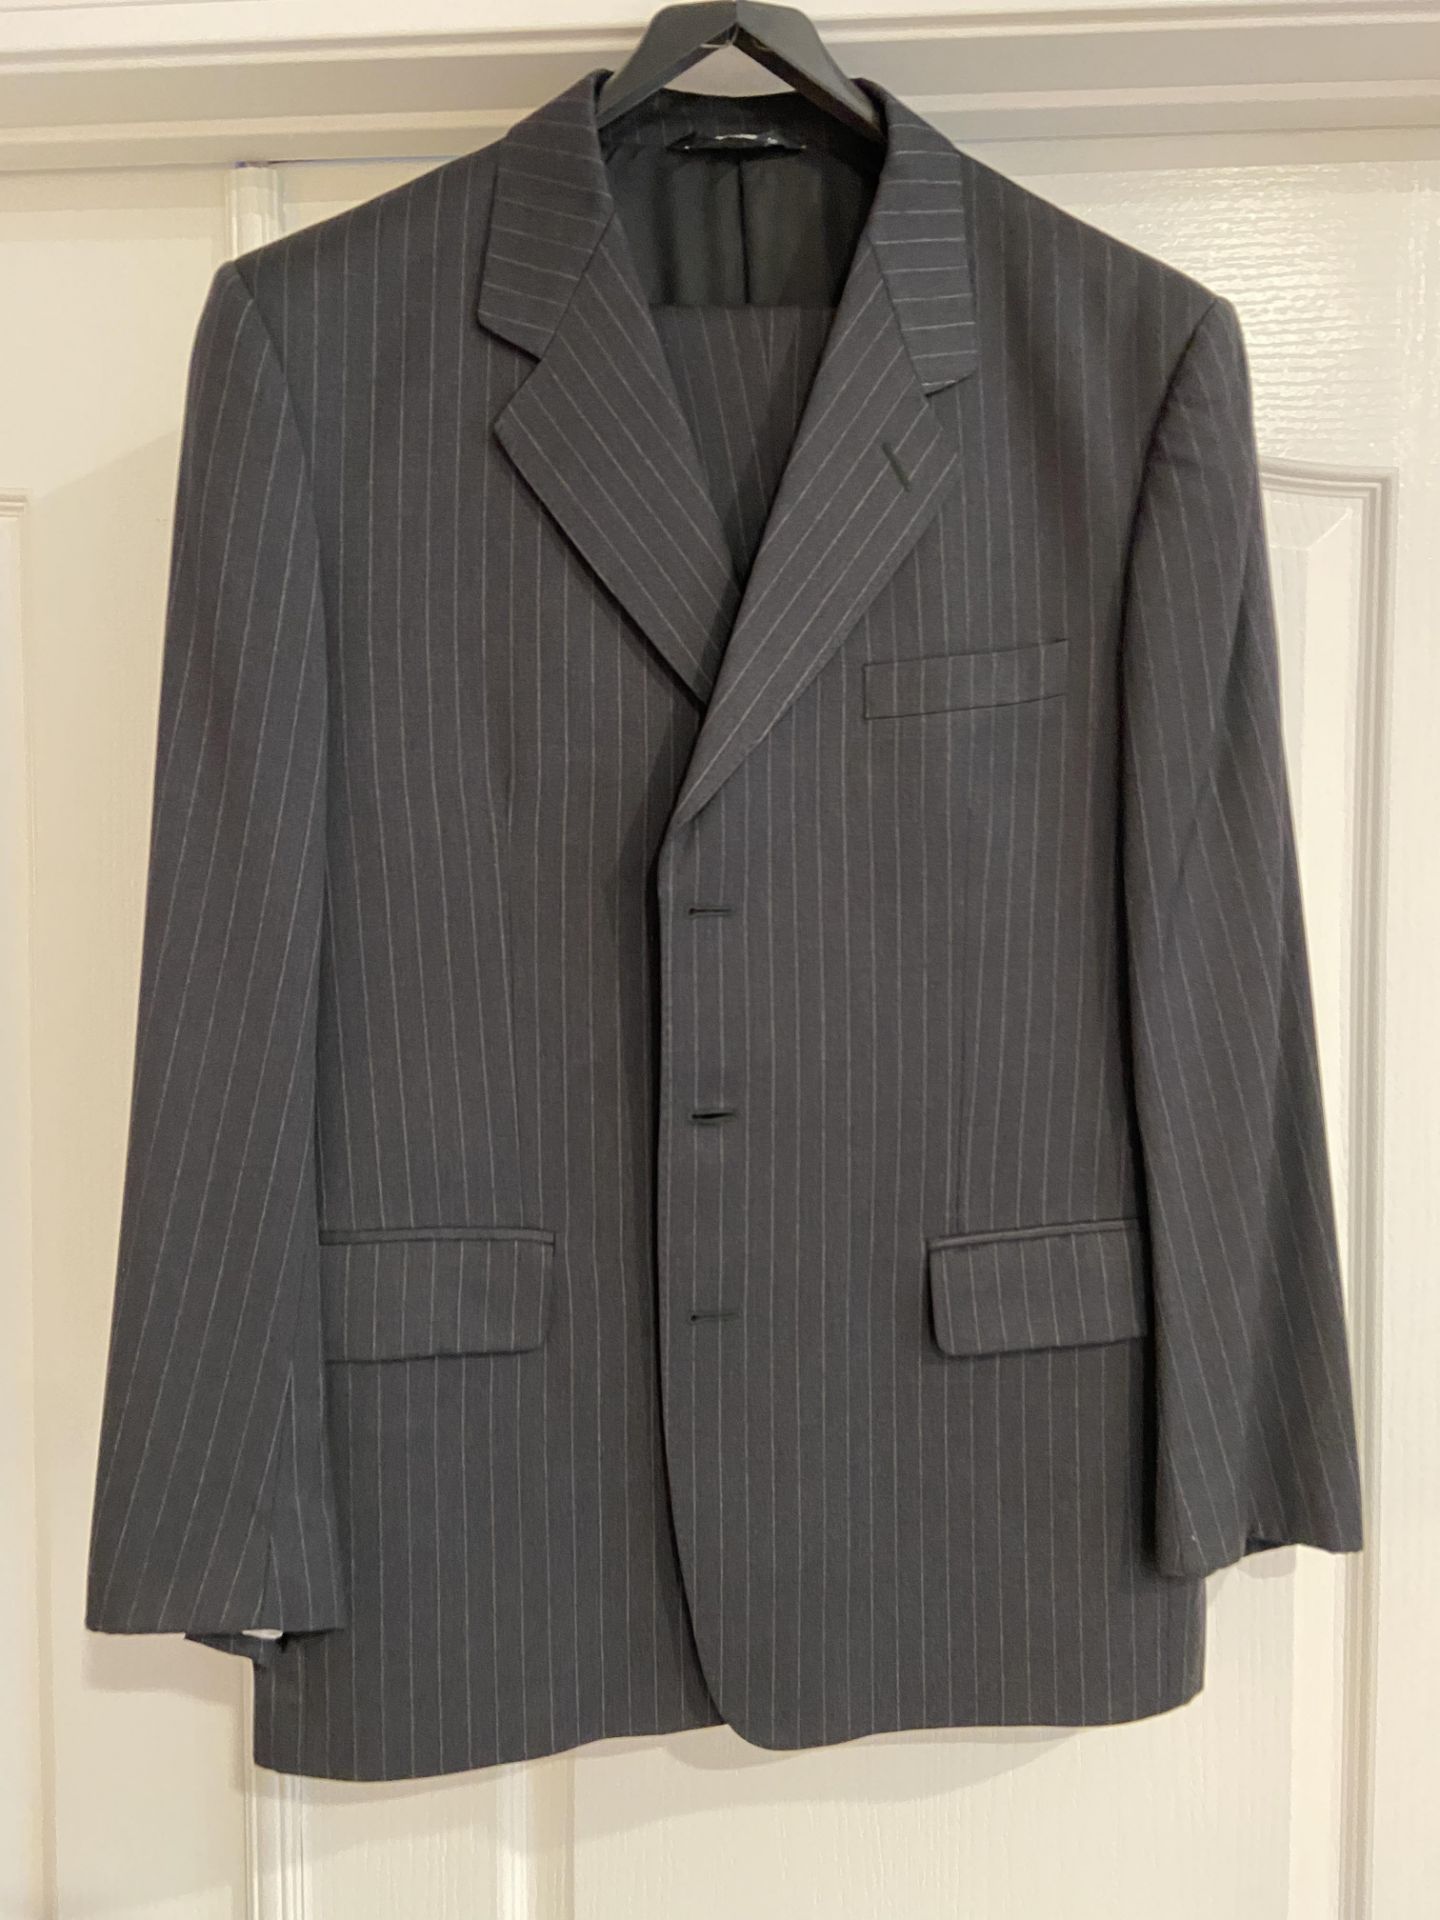 Collection of High End Men's Clothing: 6 Suits Size 42R, 1 Sport Jacket Size 42R, 1 Polo XL - Image 16 of 18